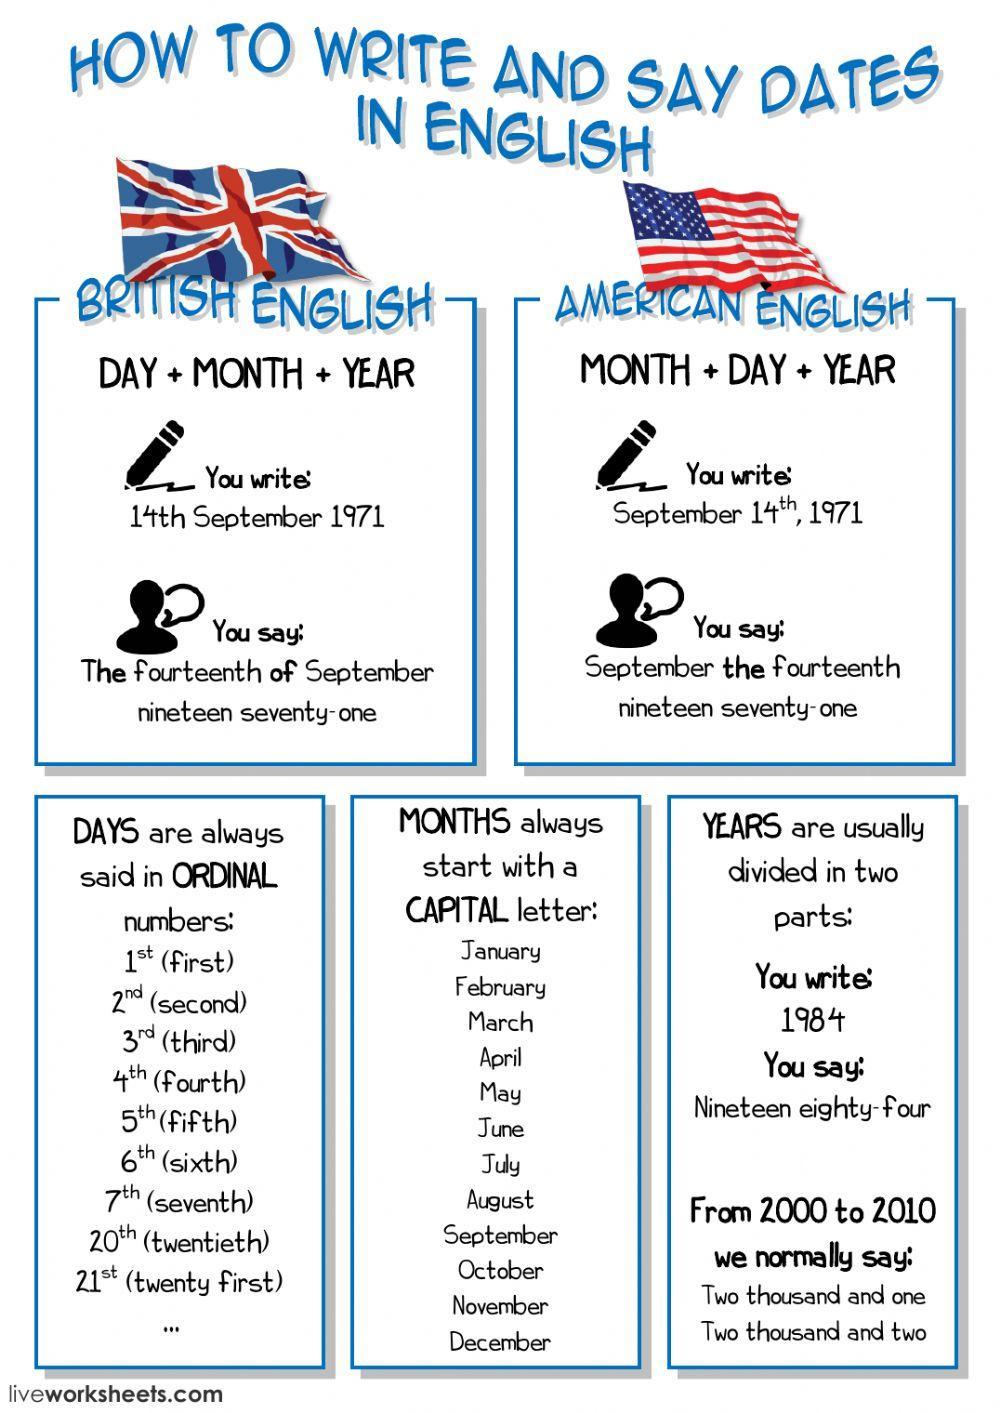 How to write and say dates in English